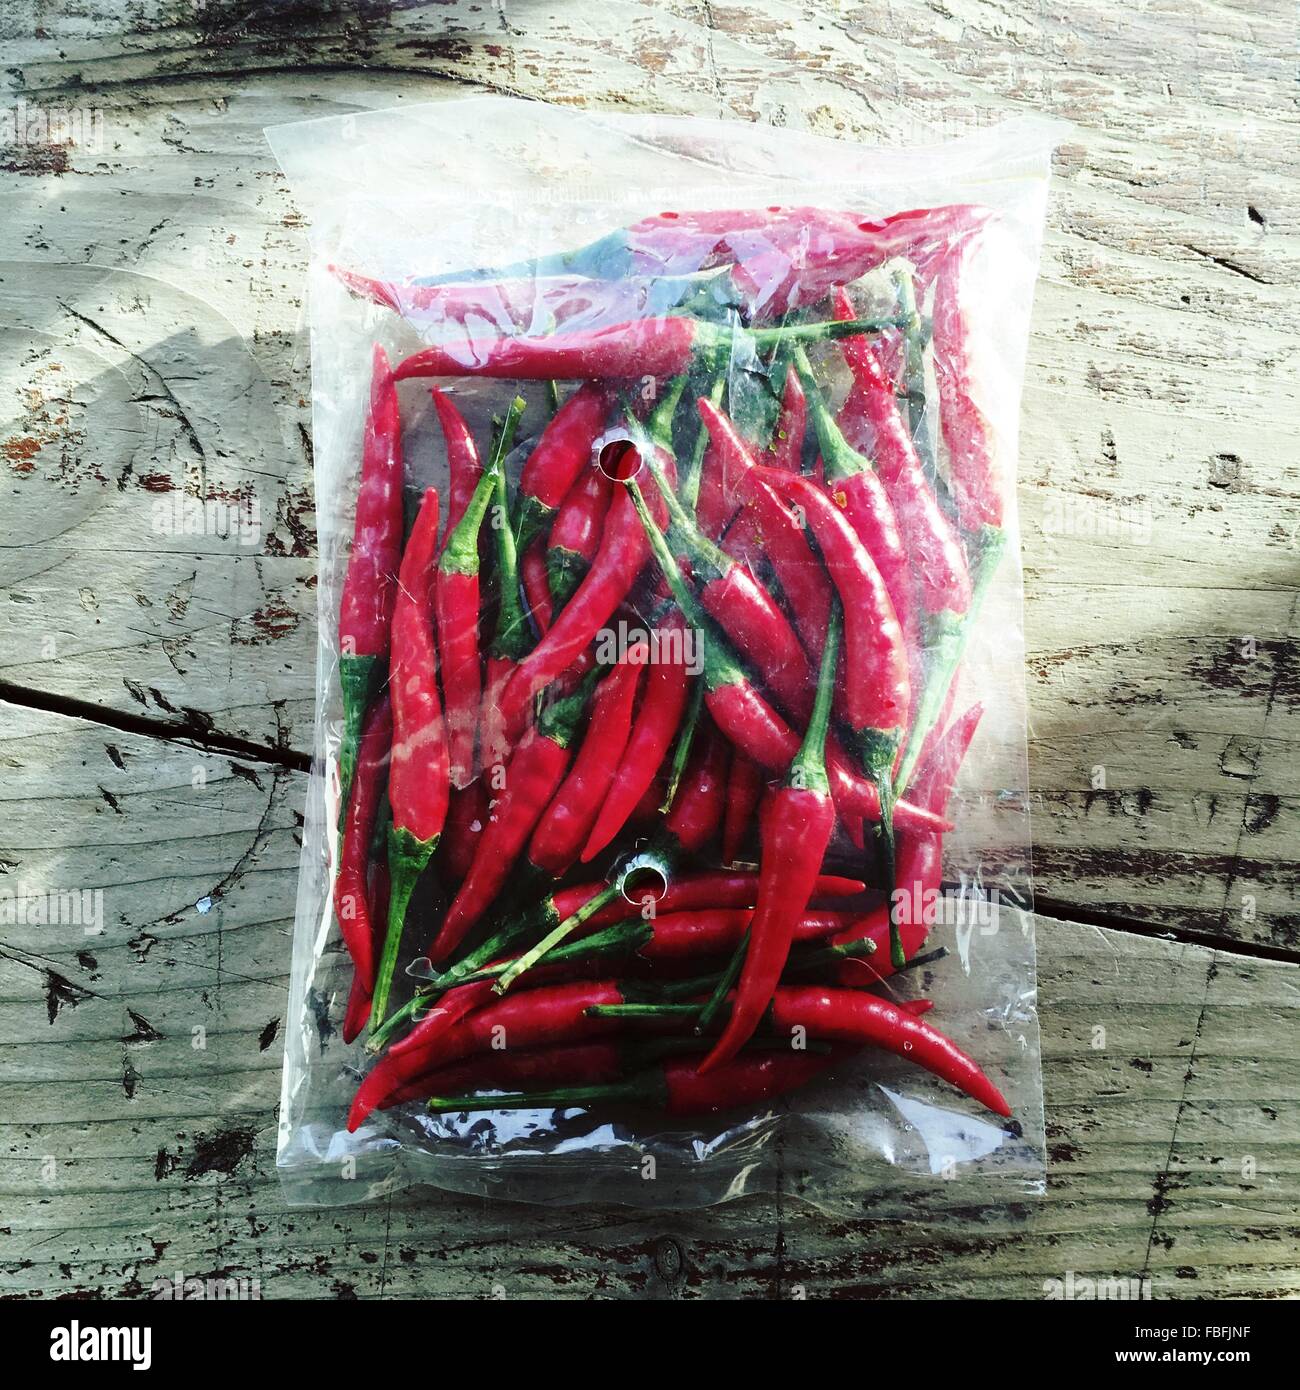 High Angle View Of Red Chili Peppers In Bag On Table Stock Photo